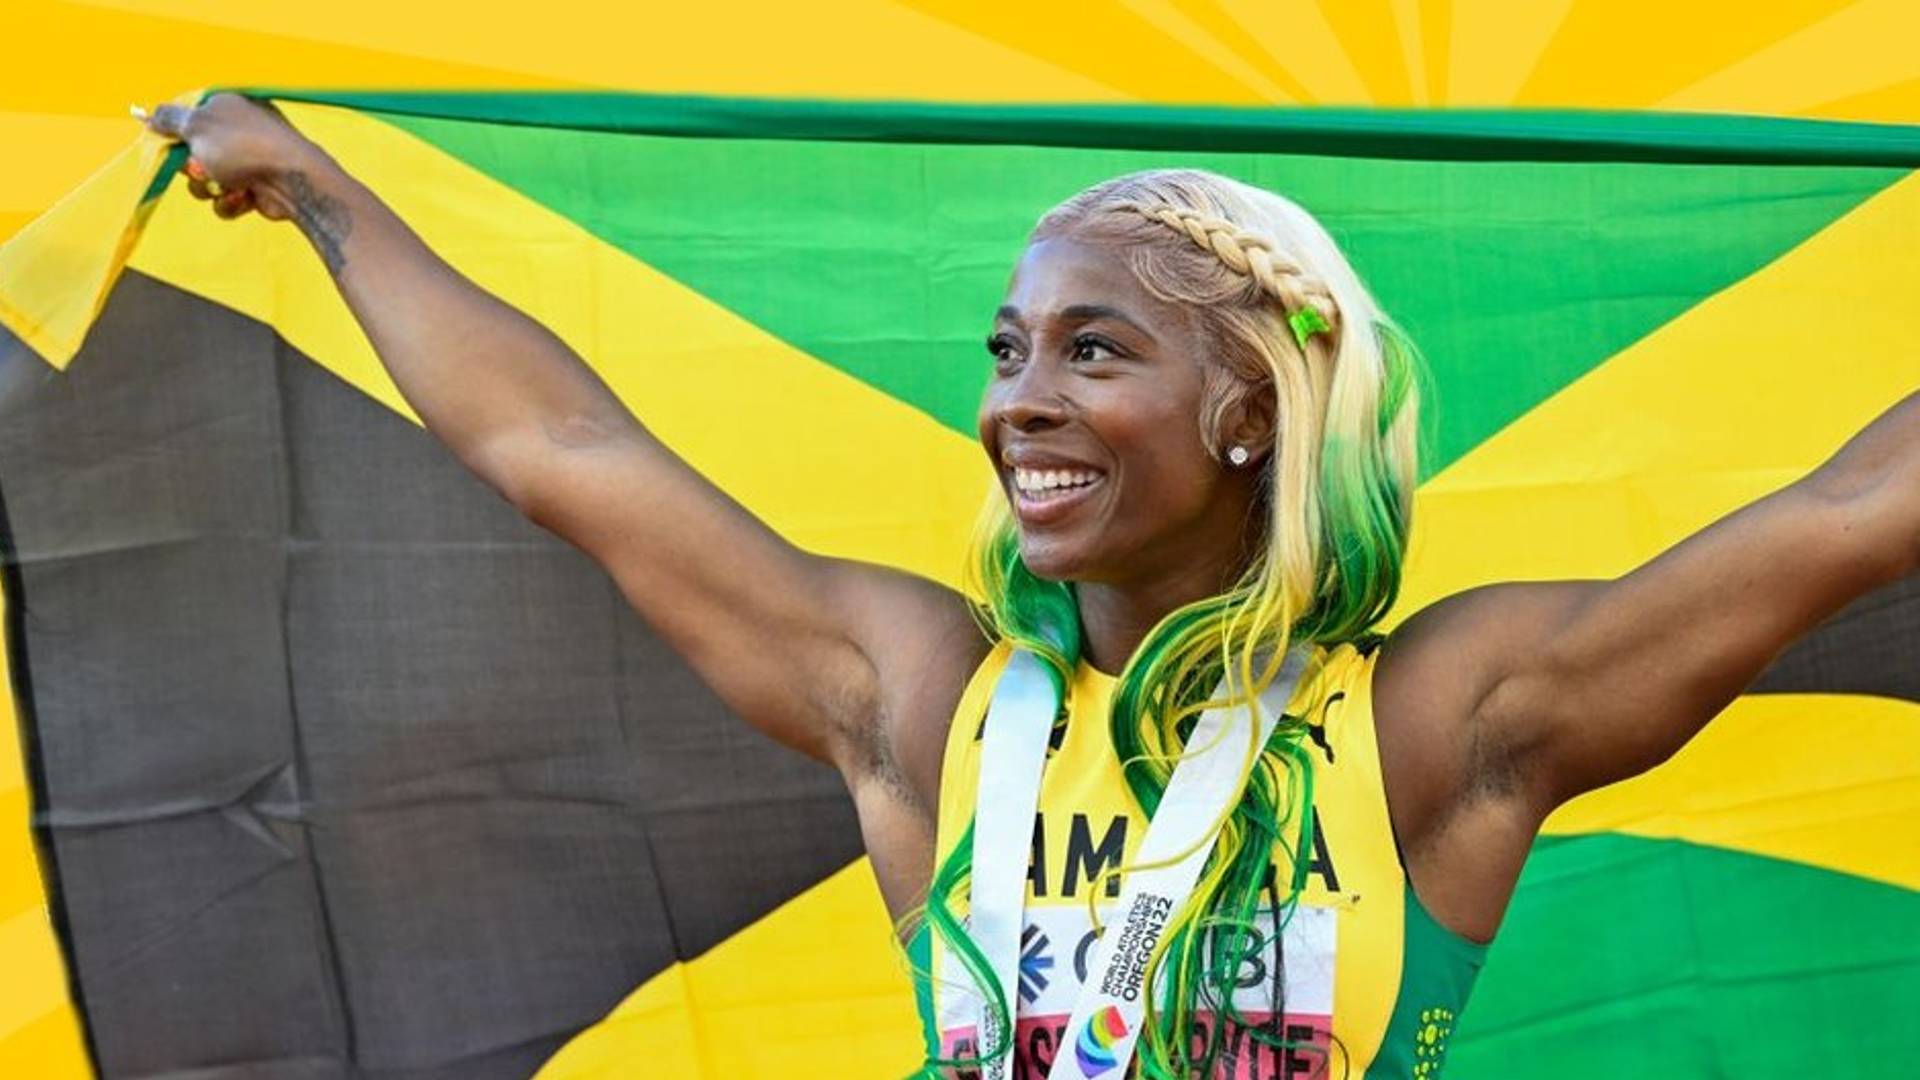 Shelly-Ann Fraser holding the Jamaican flag (Credits: Twitter)